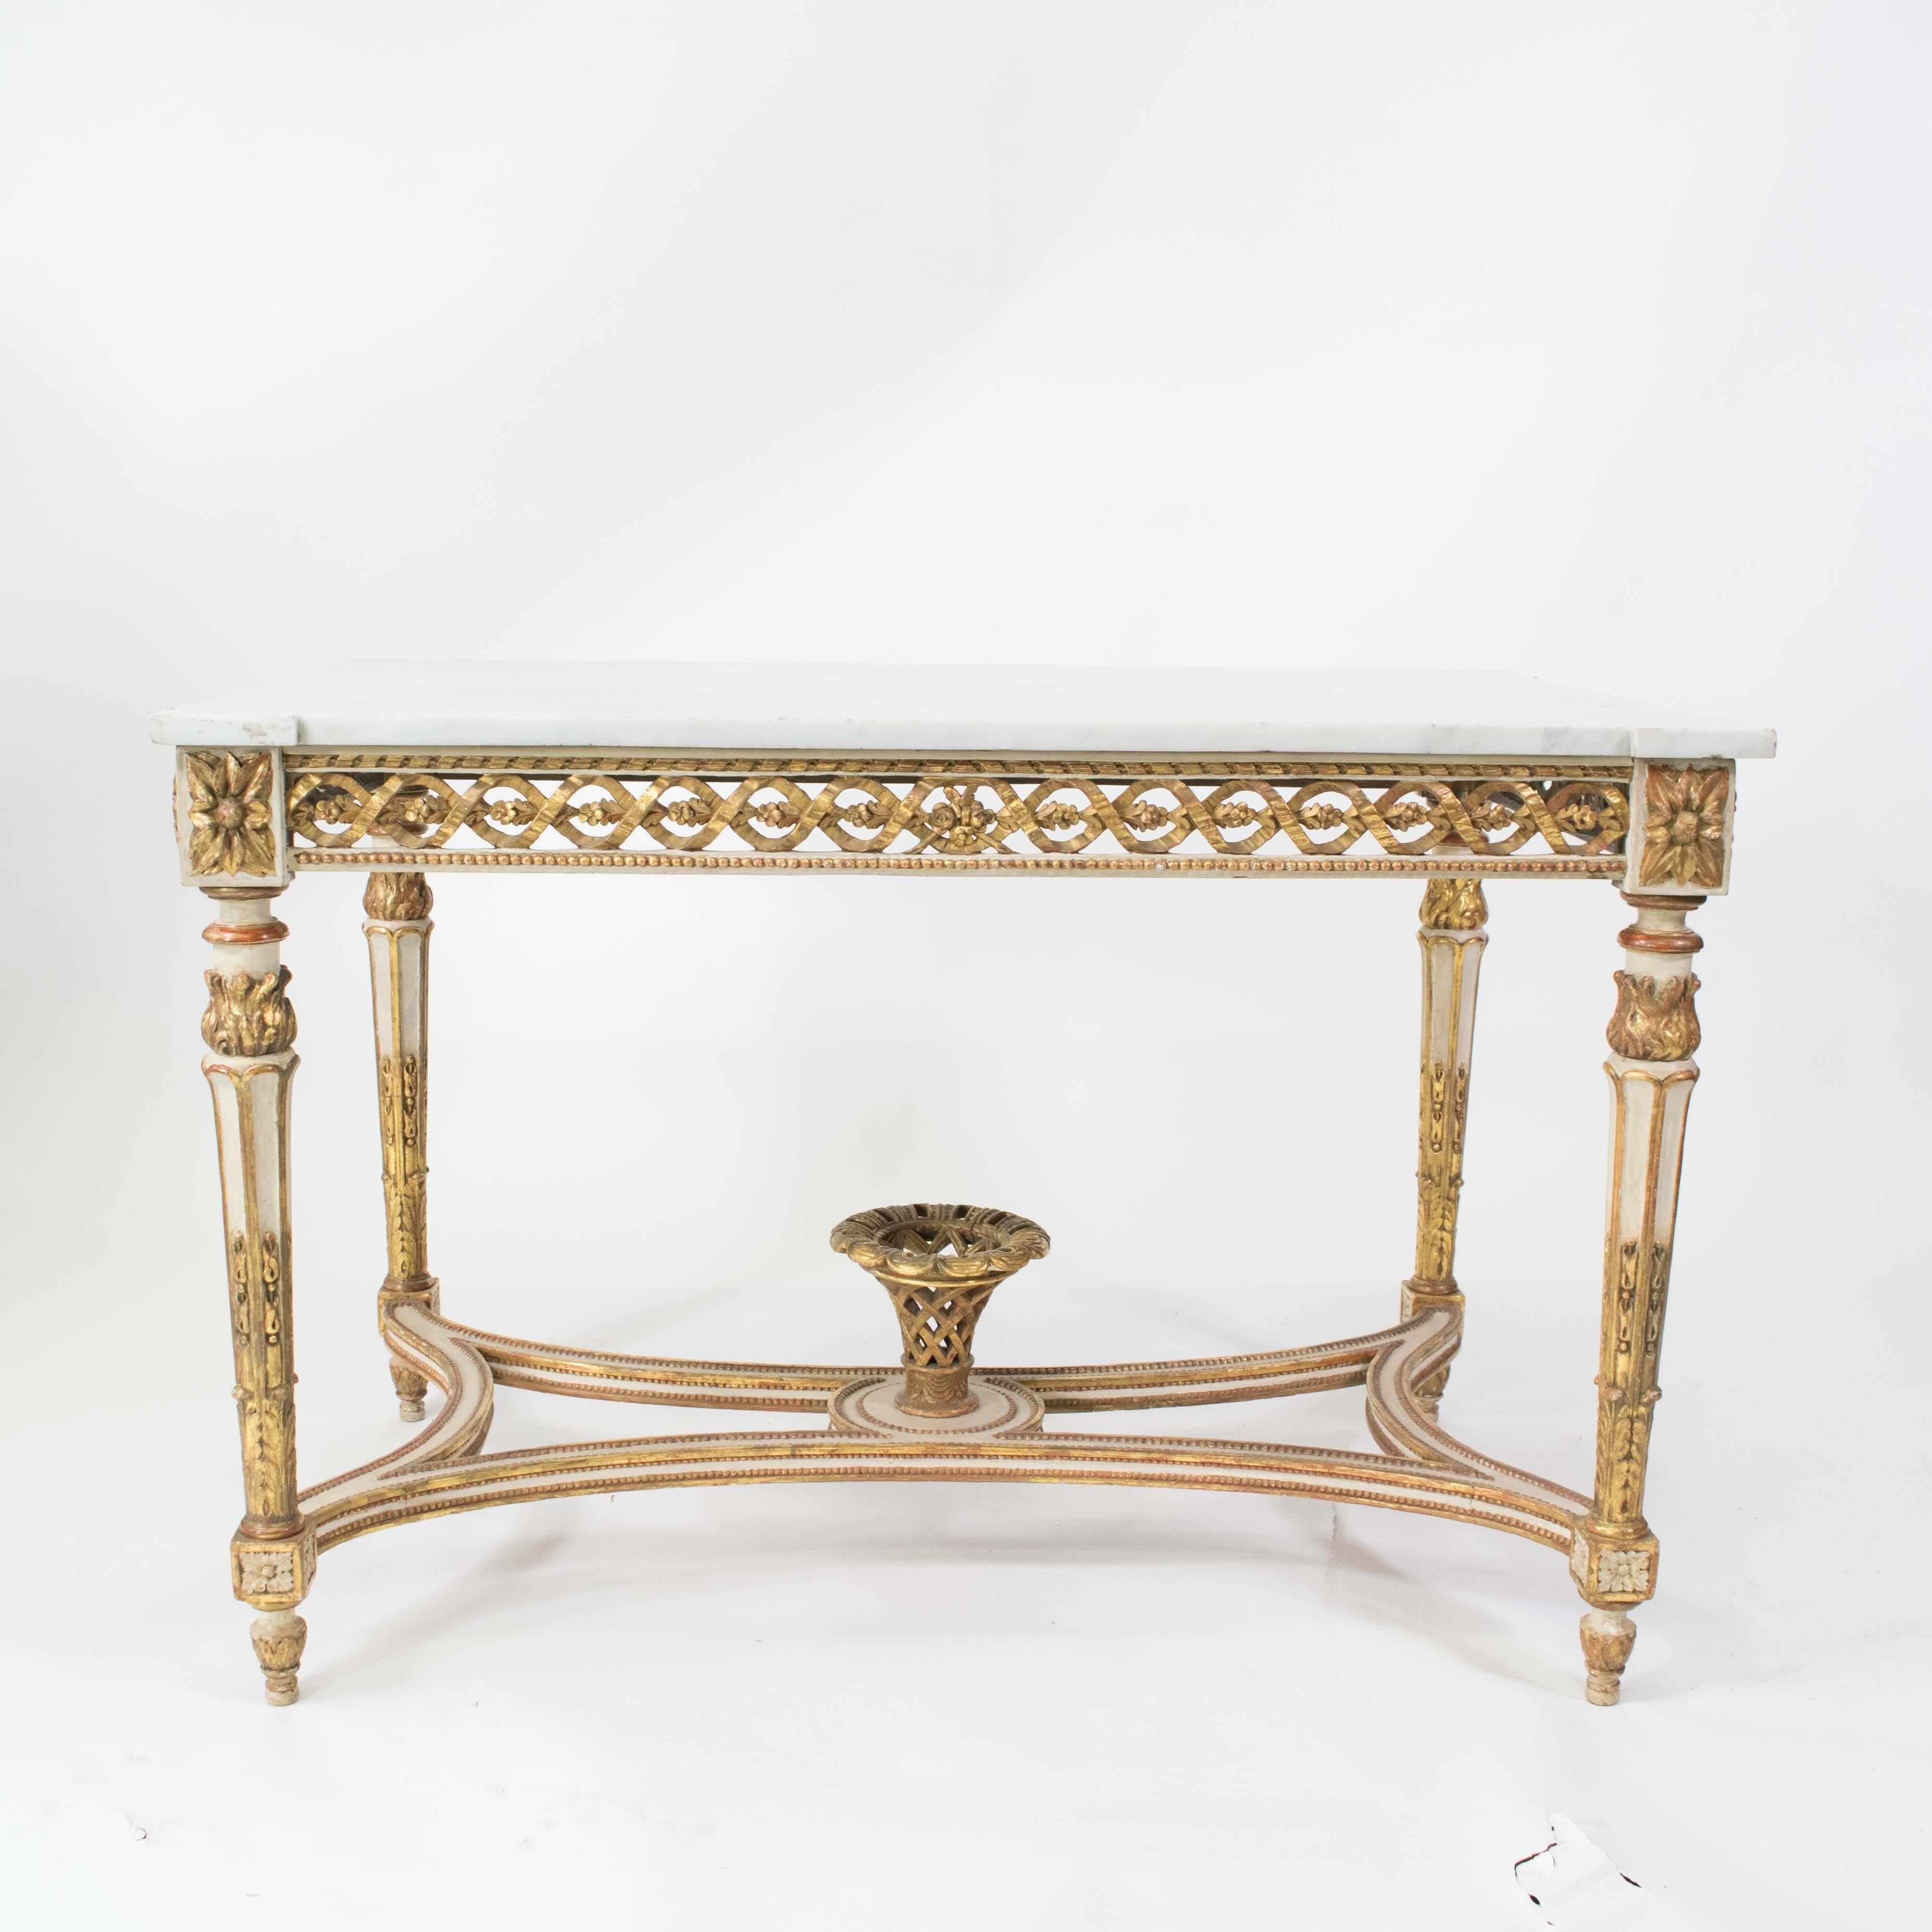 Albertina palace centre table, in the neoclassic style, oak and carved pine, white painted and giltwood, retaining the original shaped marble top.
Vienna, circa 1770.

Provenance: The pair to this table remains at the Albertina Palace, Vienna